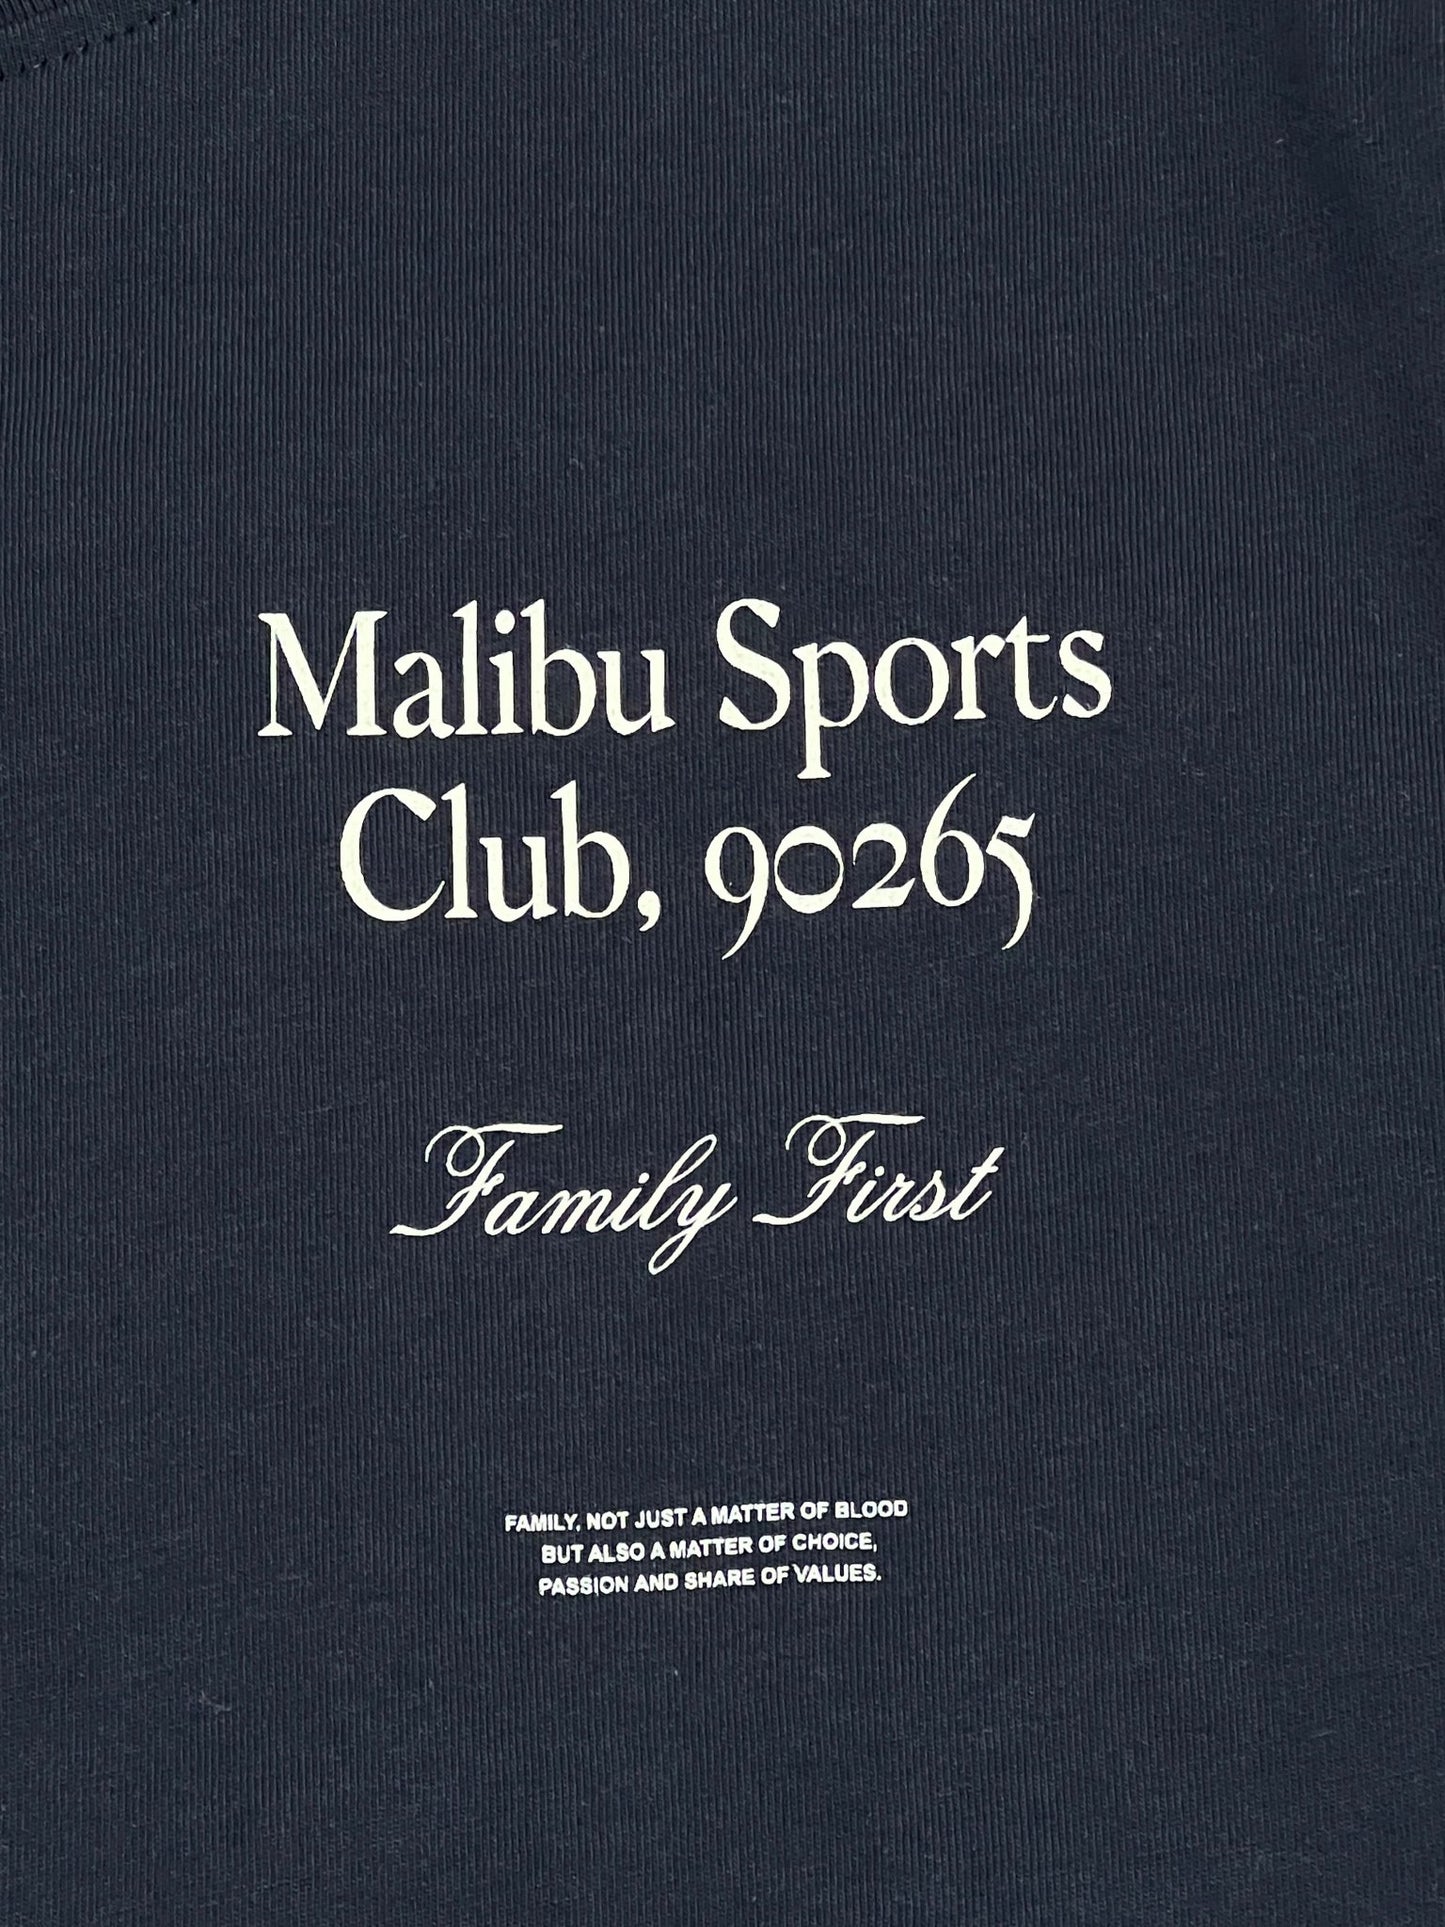 Malibu sports club FAMILY FIRST navy blue t-shirt - Made In Italy.